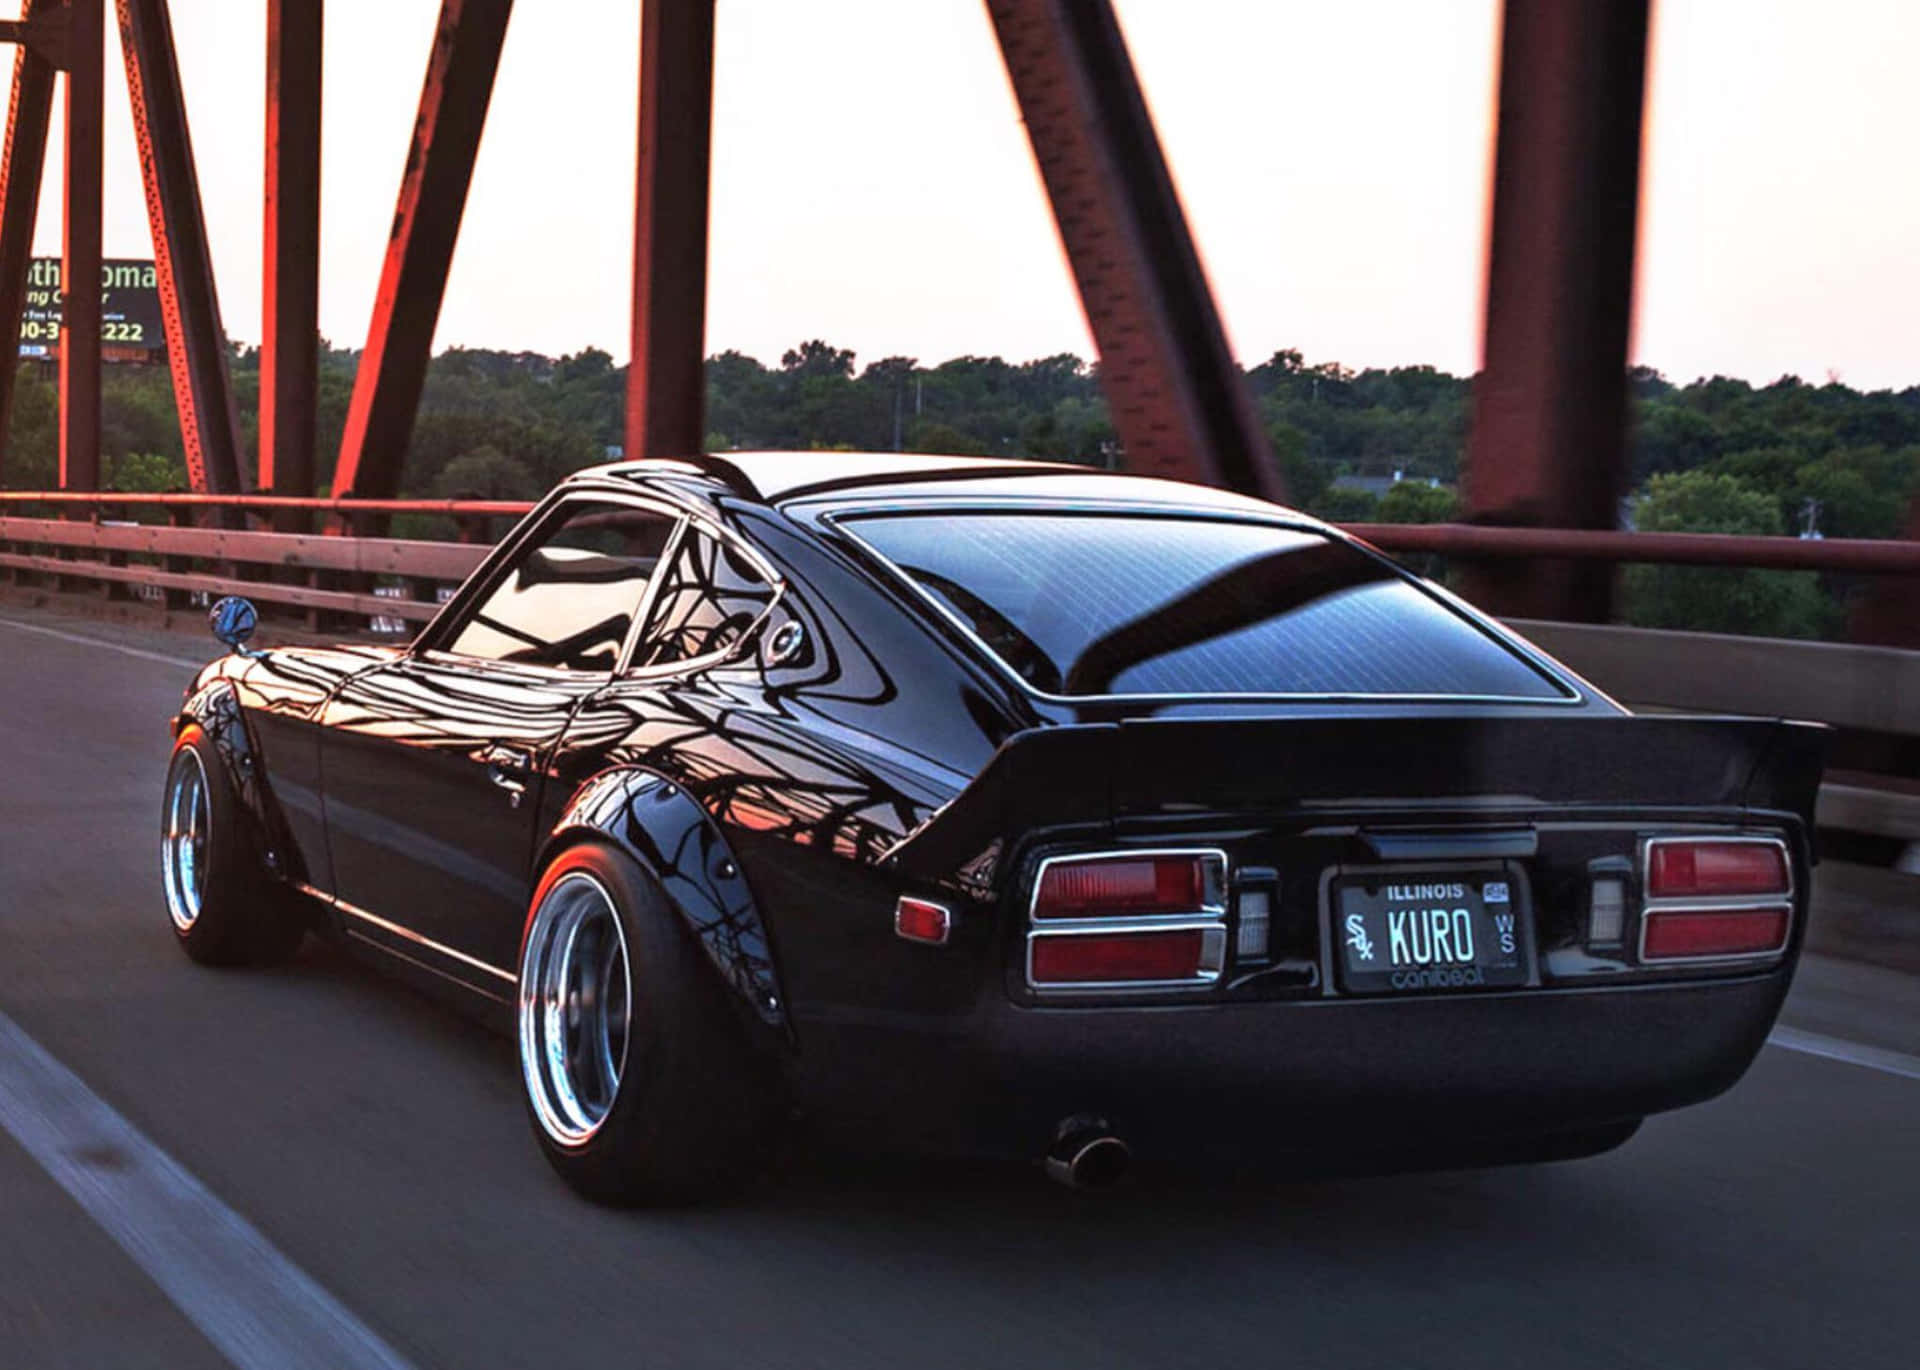 A Classic Datsun 240z Gleaming In The Sunset Wallpaper